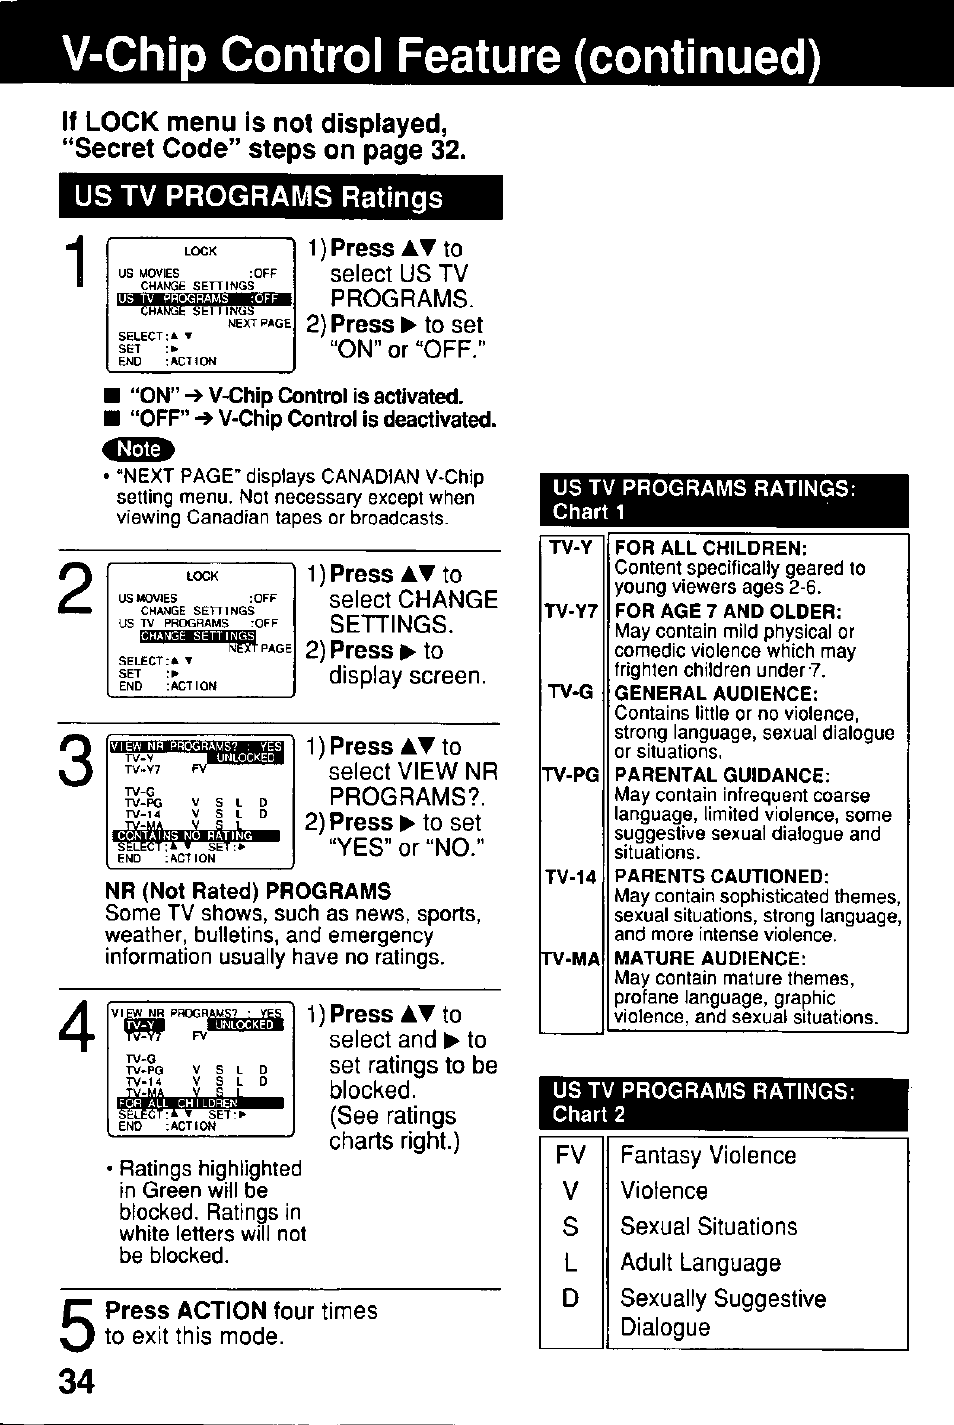 V-chip control feature (continued), Us tv programs ratings | Panasonic Combinatin VCR AG-513E User Manual | Page 34 / 40